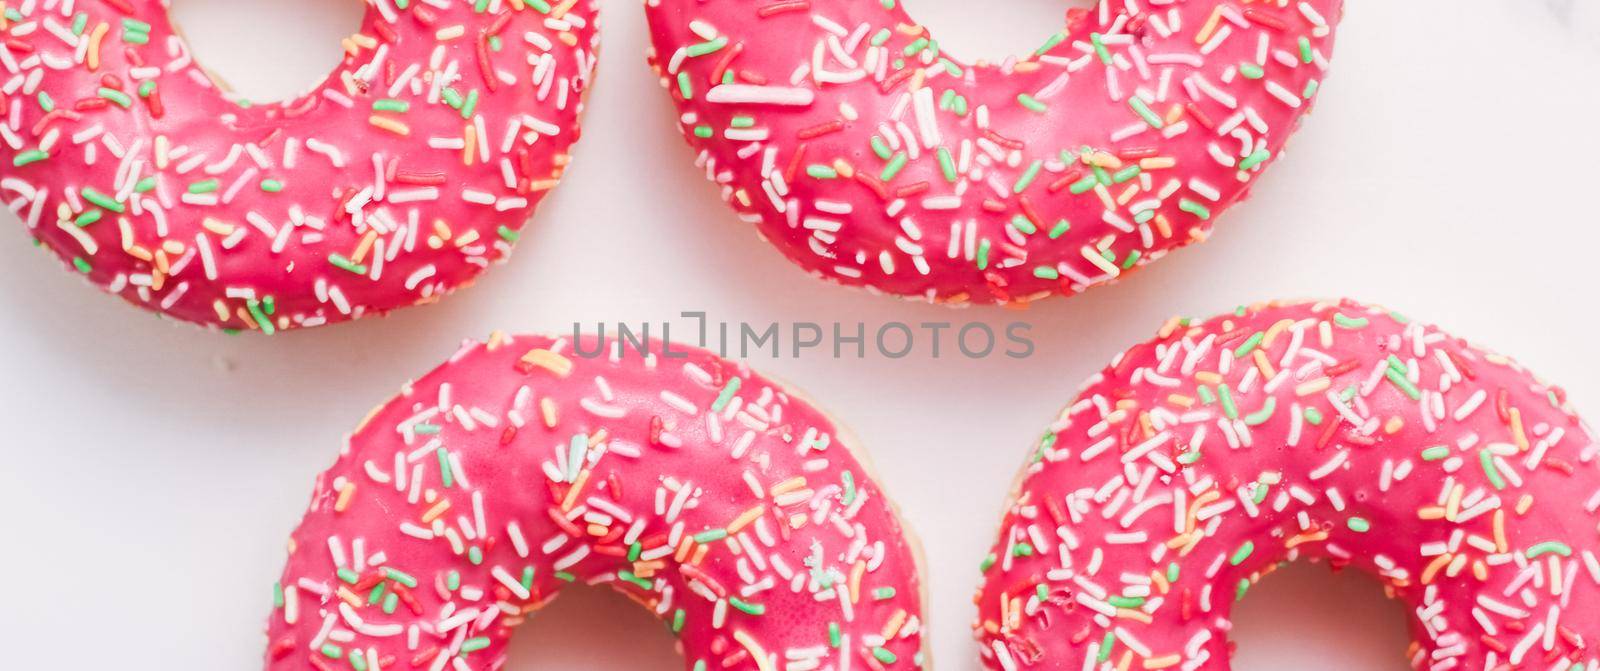 Bakery, branding and cafe concept - Frosted sprinkled donuts, sweet pastry dessert on marble table background, doughnuts as tasty snack, top view food brand flat lay for blog, menu or cookbook design